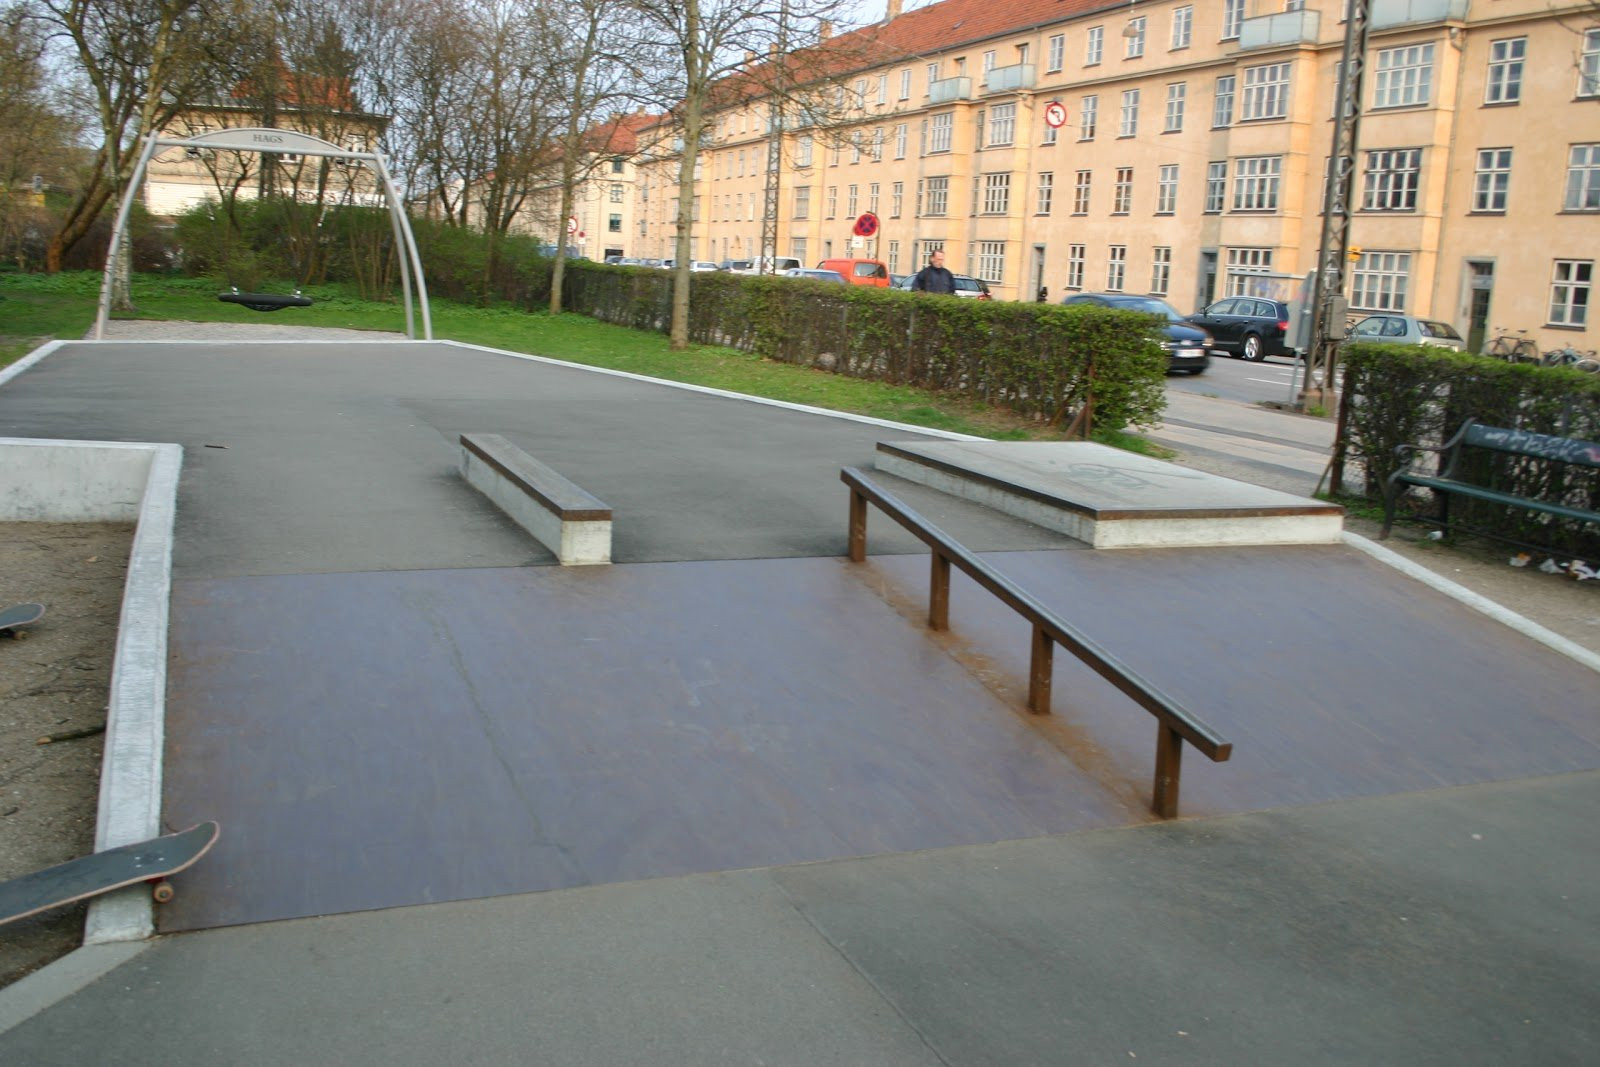 Vanløse skatepark was built in 2010, so it is relatively new. It is a small park with several obstacles. The park is a good place for beginners as all the obstacles are low. The park is oblong and lies on Jyllingevej. The shape of the park makes it easy to skate in one single line from one end to the other. The park is worth a visit for a short session, however not if you have to travel far to get there.The park also has a small playground for children. This means that there are often families with small children. It is important to show consideration for them.